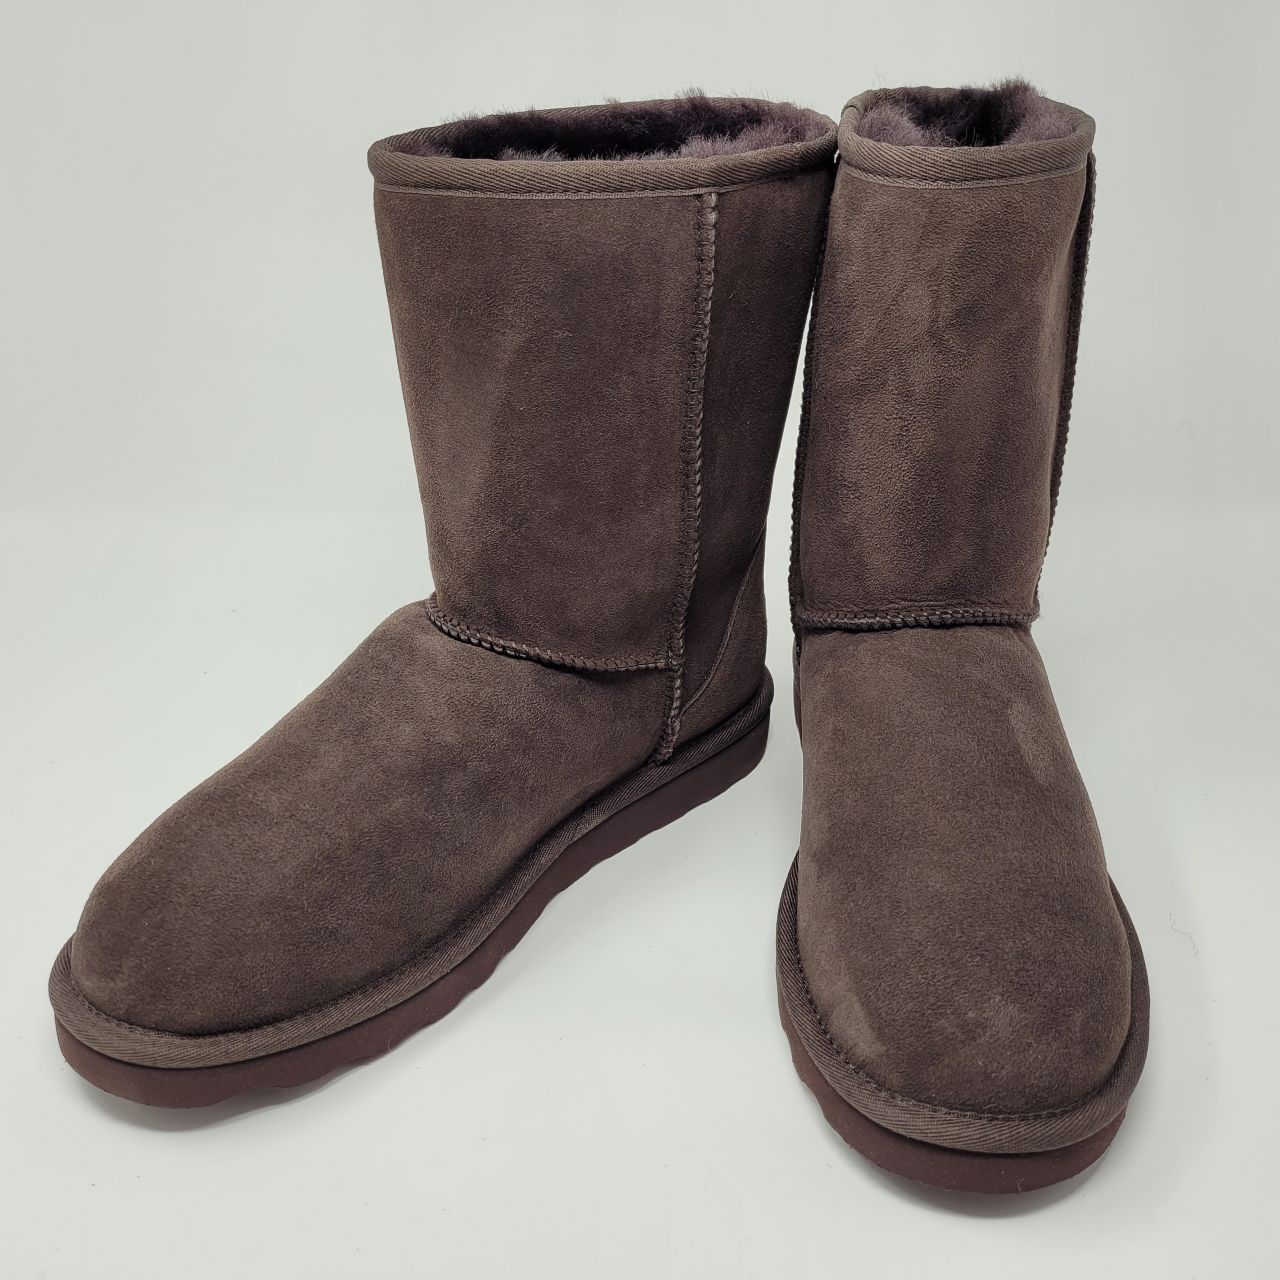 Chocolate Brown Sheepskin Boots to Buy Online UK from Jacobs & Dalton